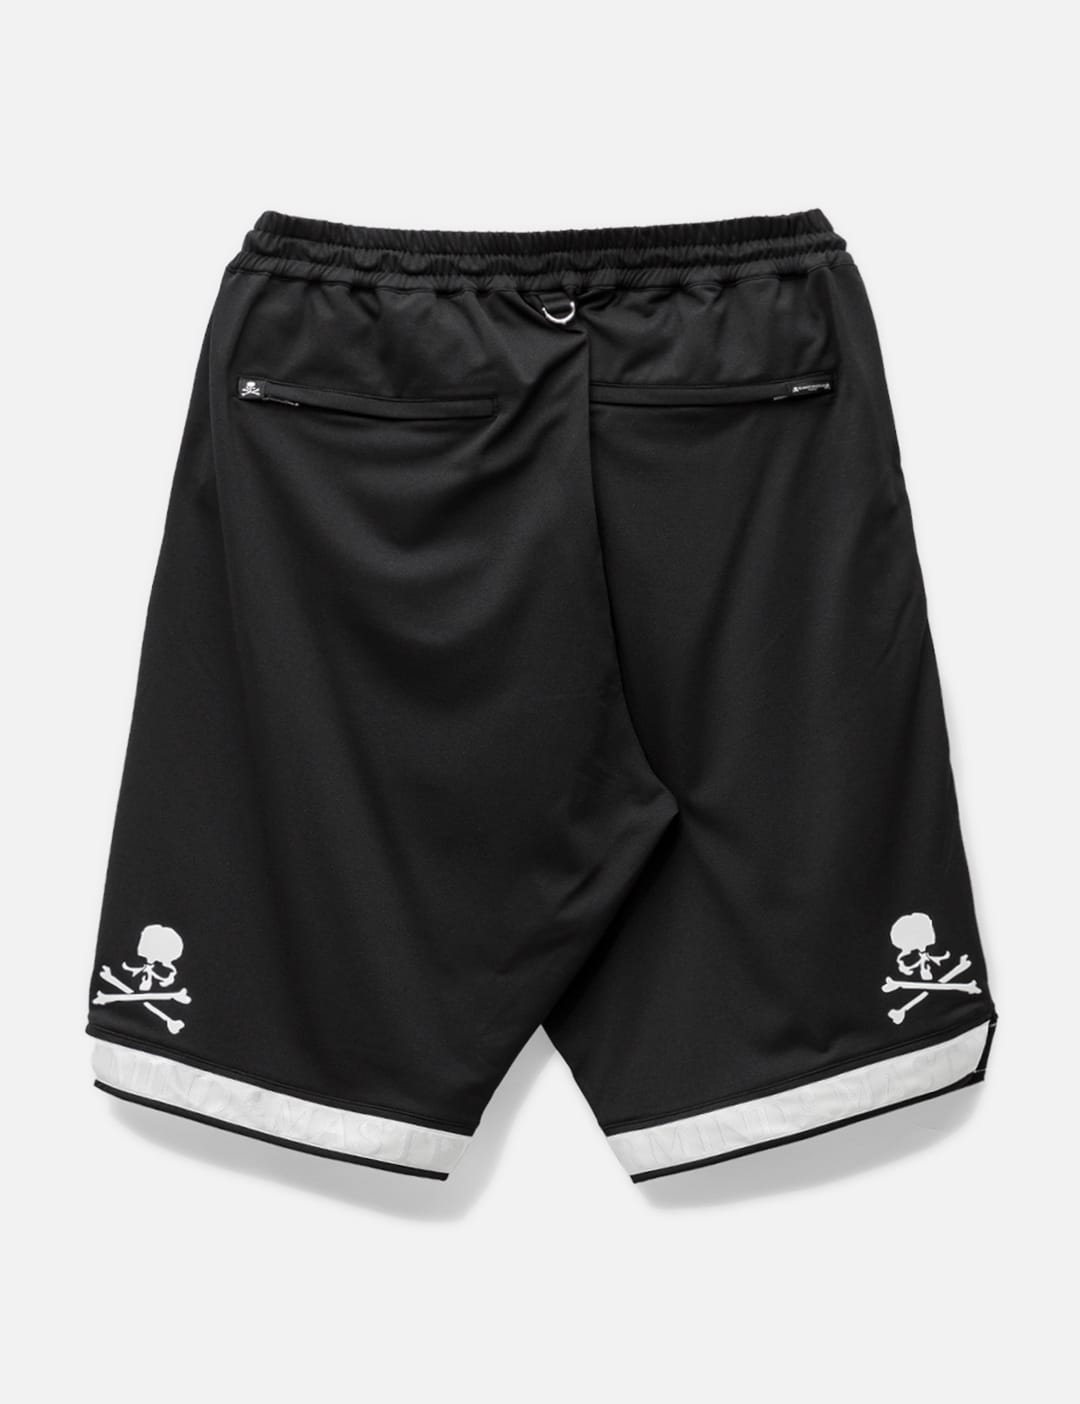 Mastermind World - TAPE LOOSE SHORTS | HBX - Globally Curated